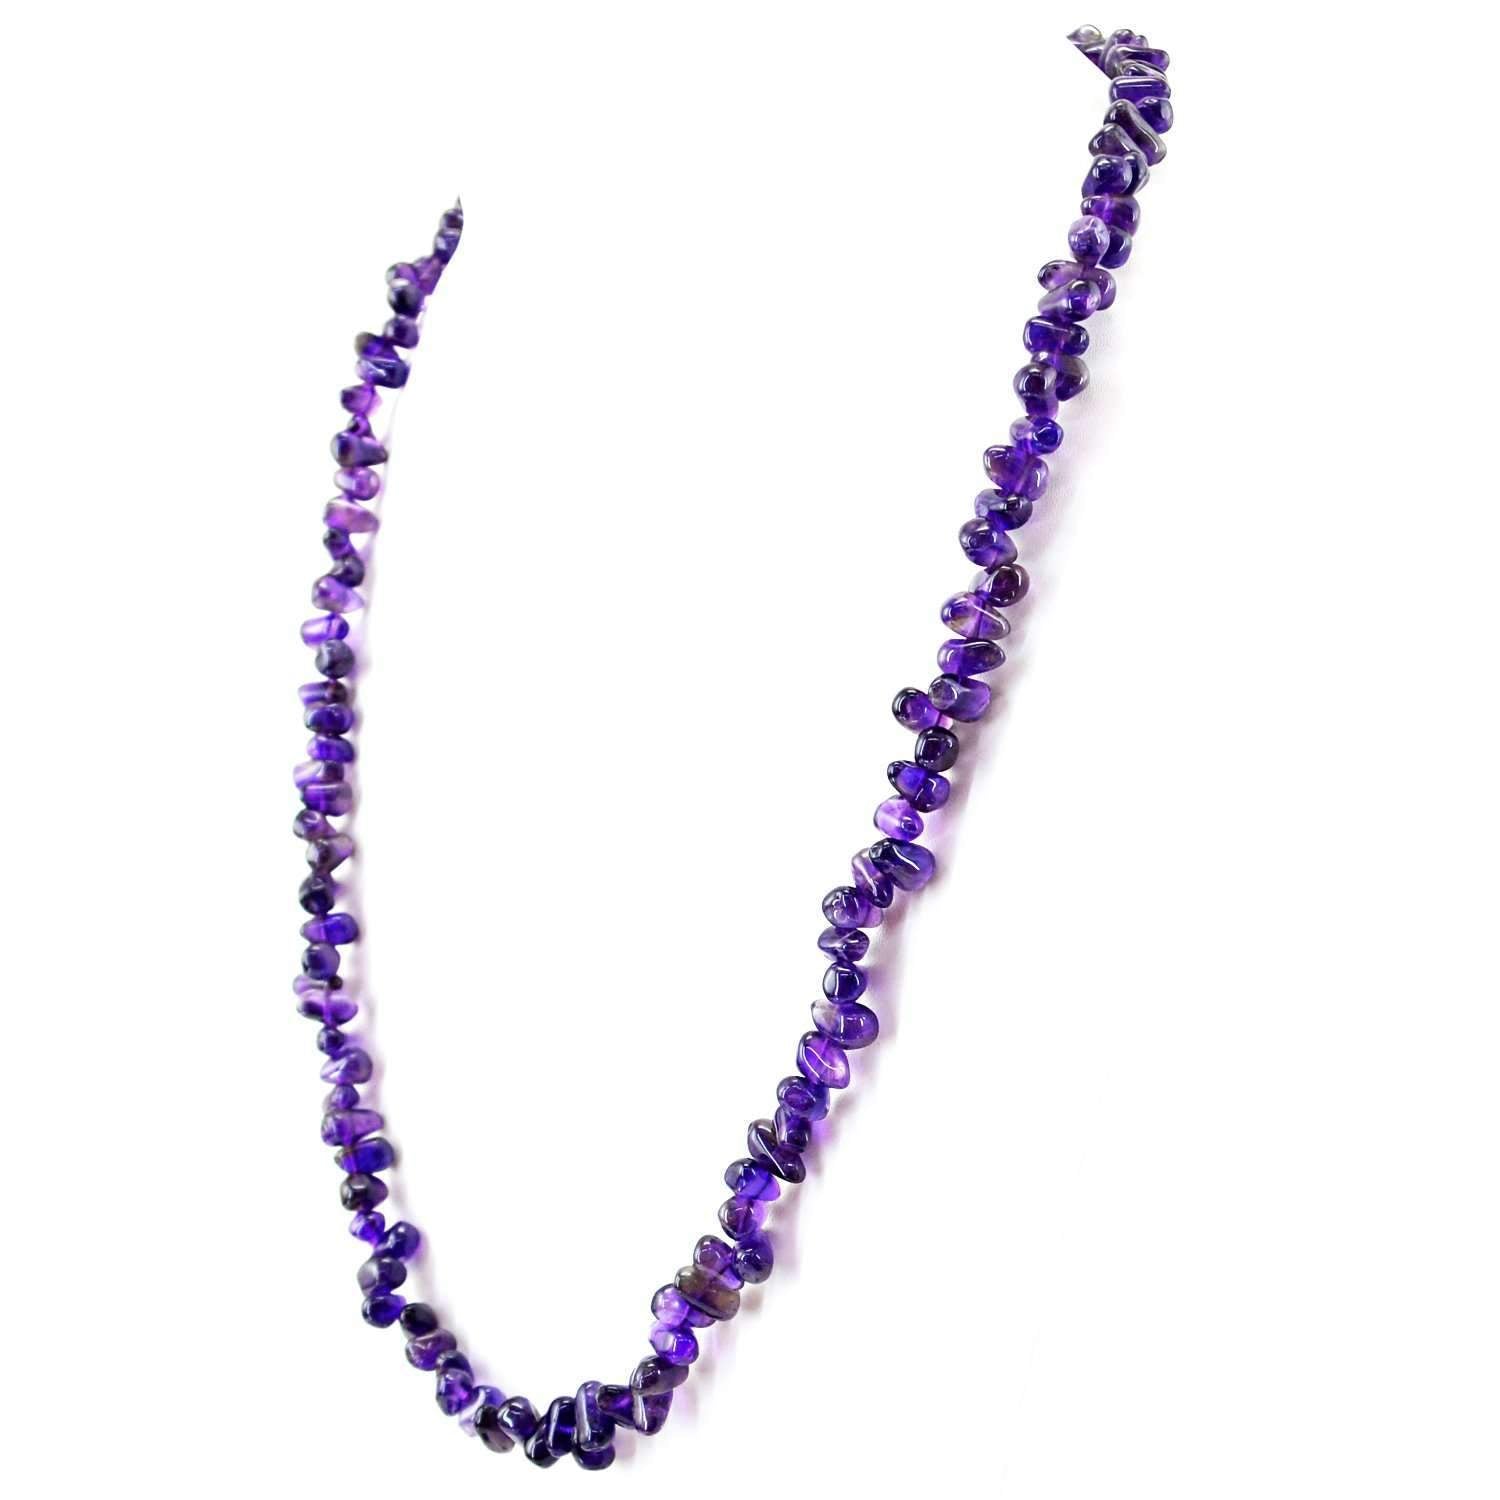 gemsmore:20 Inches Long Purple Amethyst Necklace Tear Drop Beads